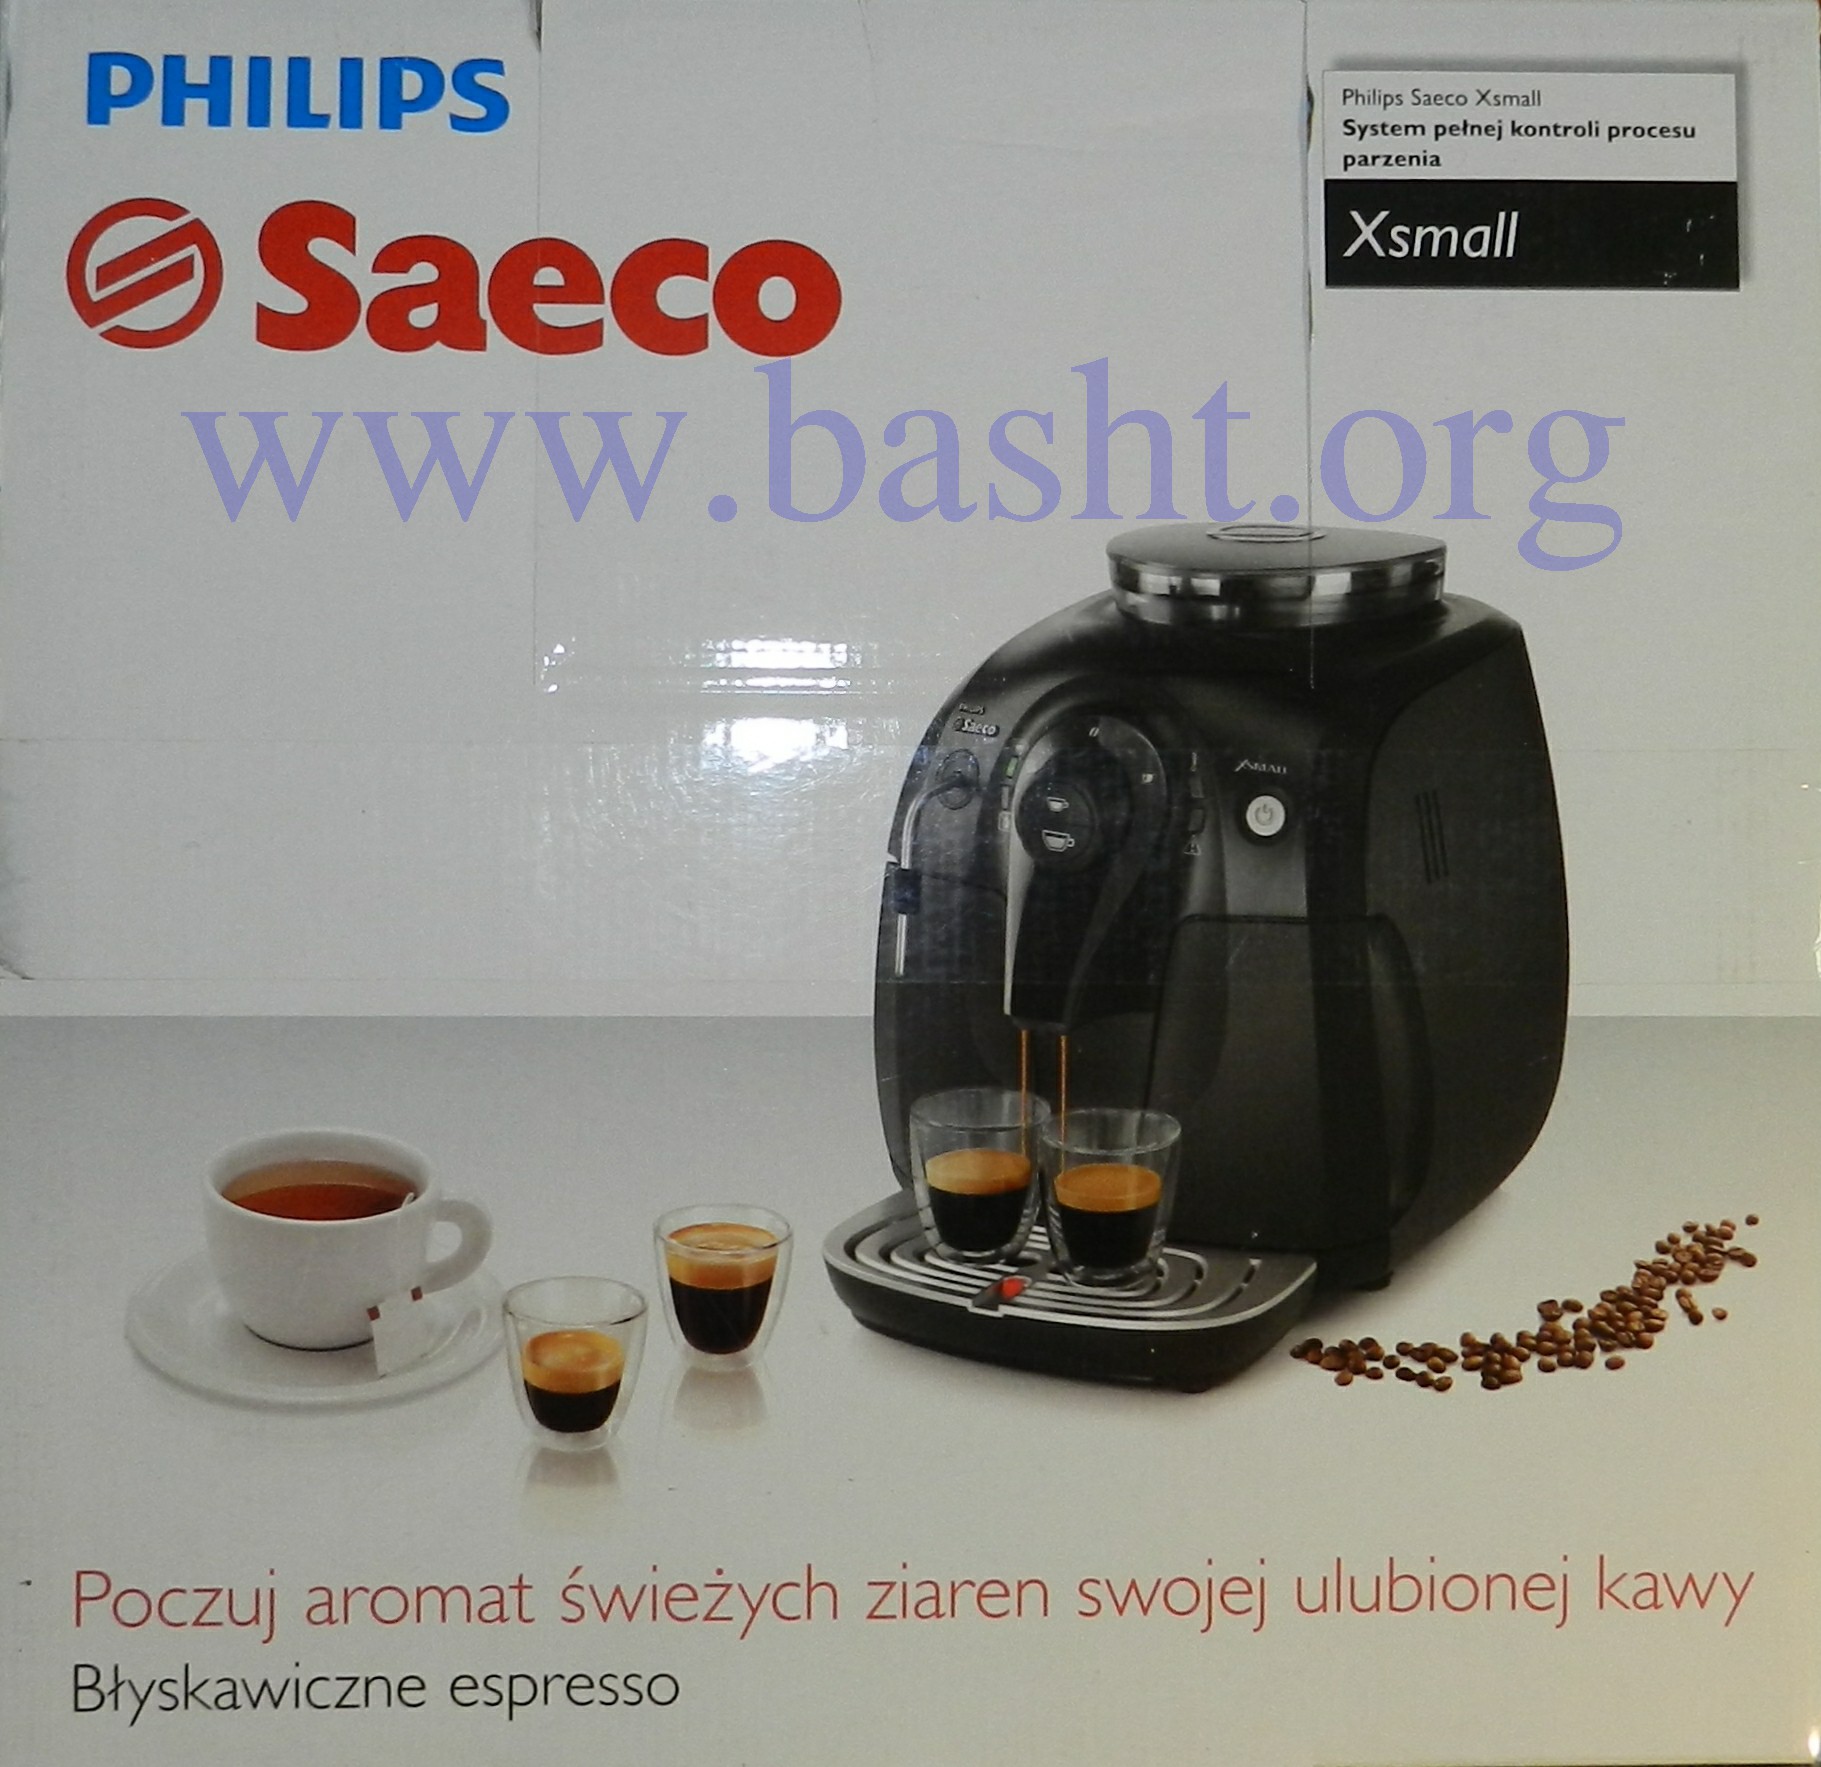 Saeco philips xsmall steam фото 17